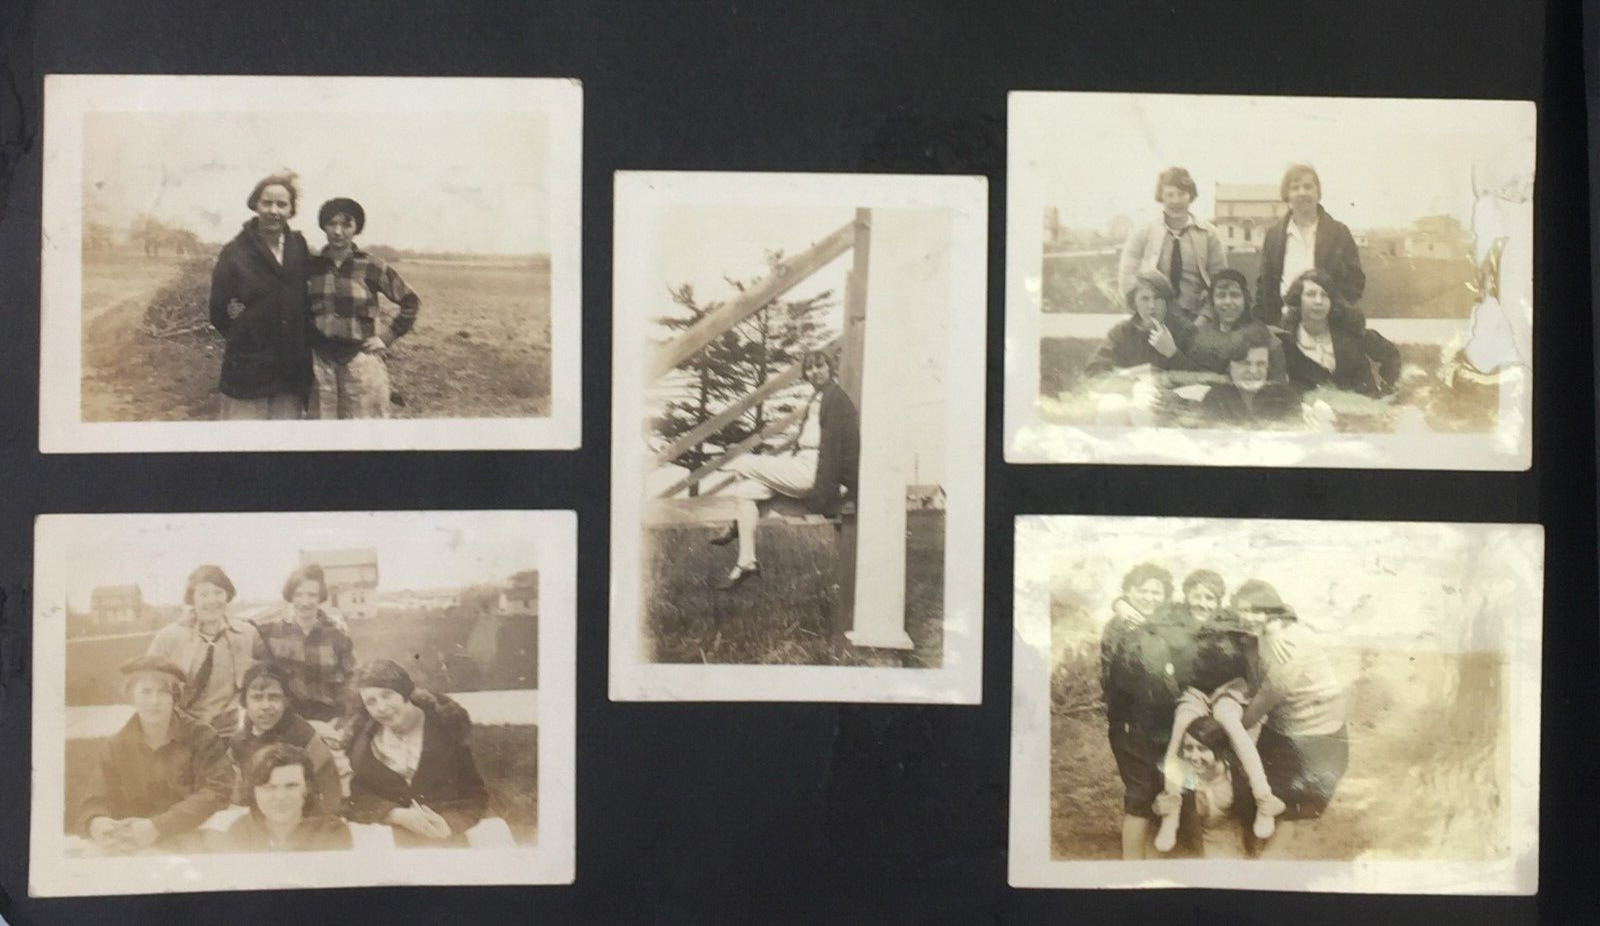 Lot of 5 Vintage 1920s Teenager Photographs